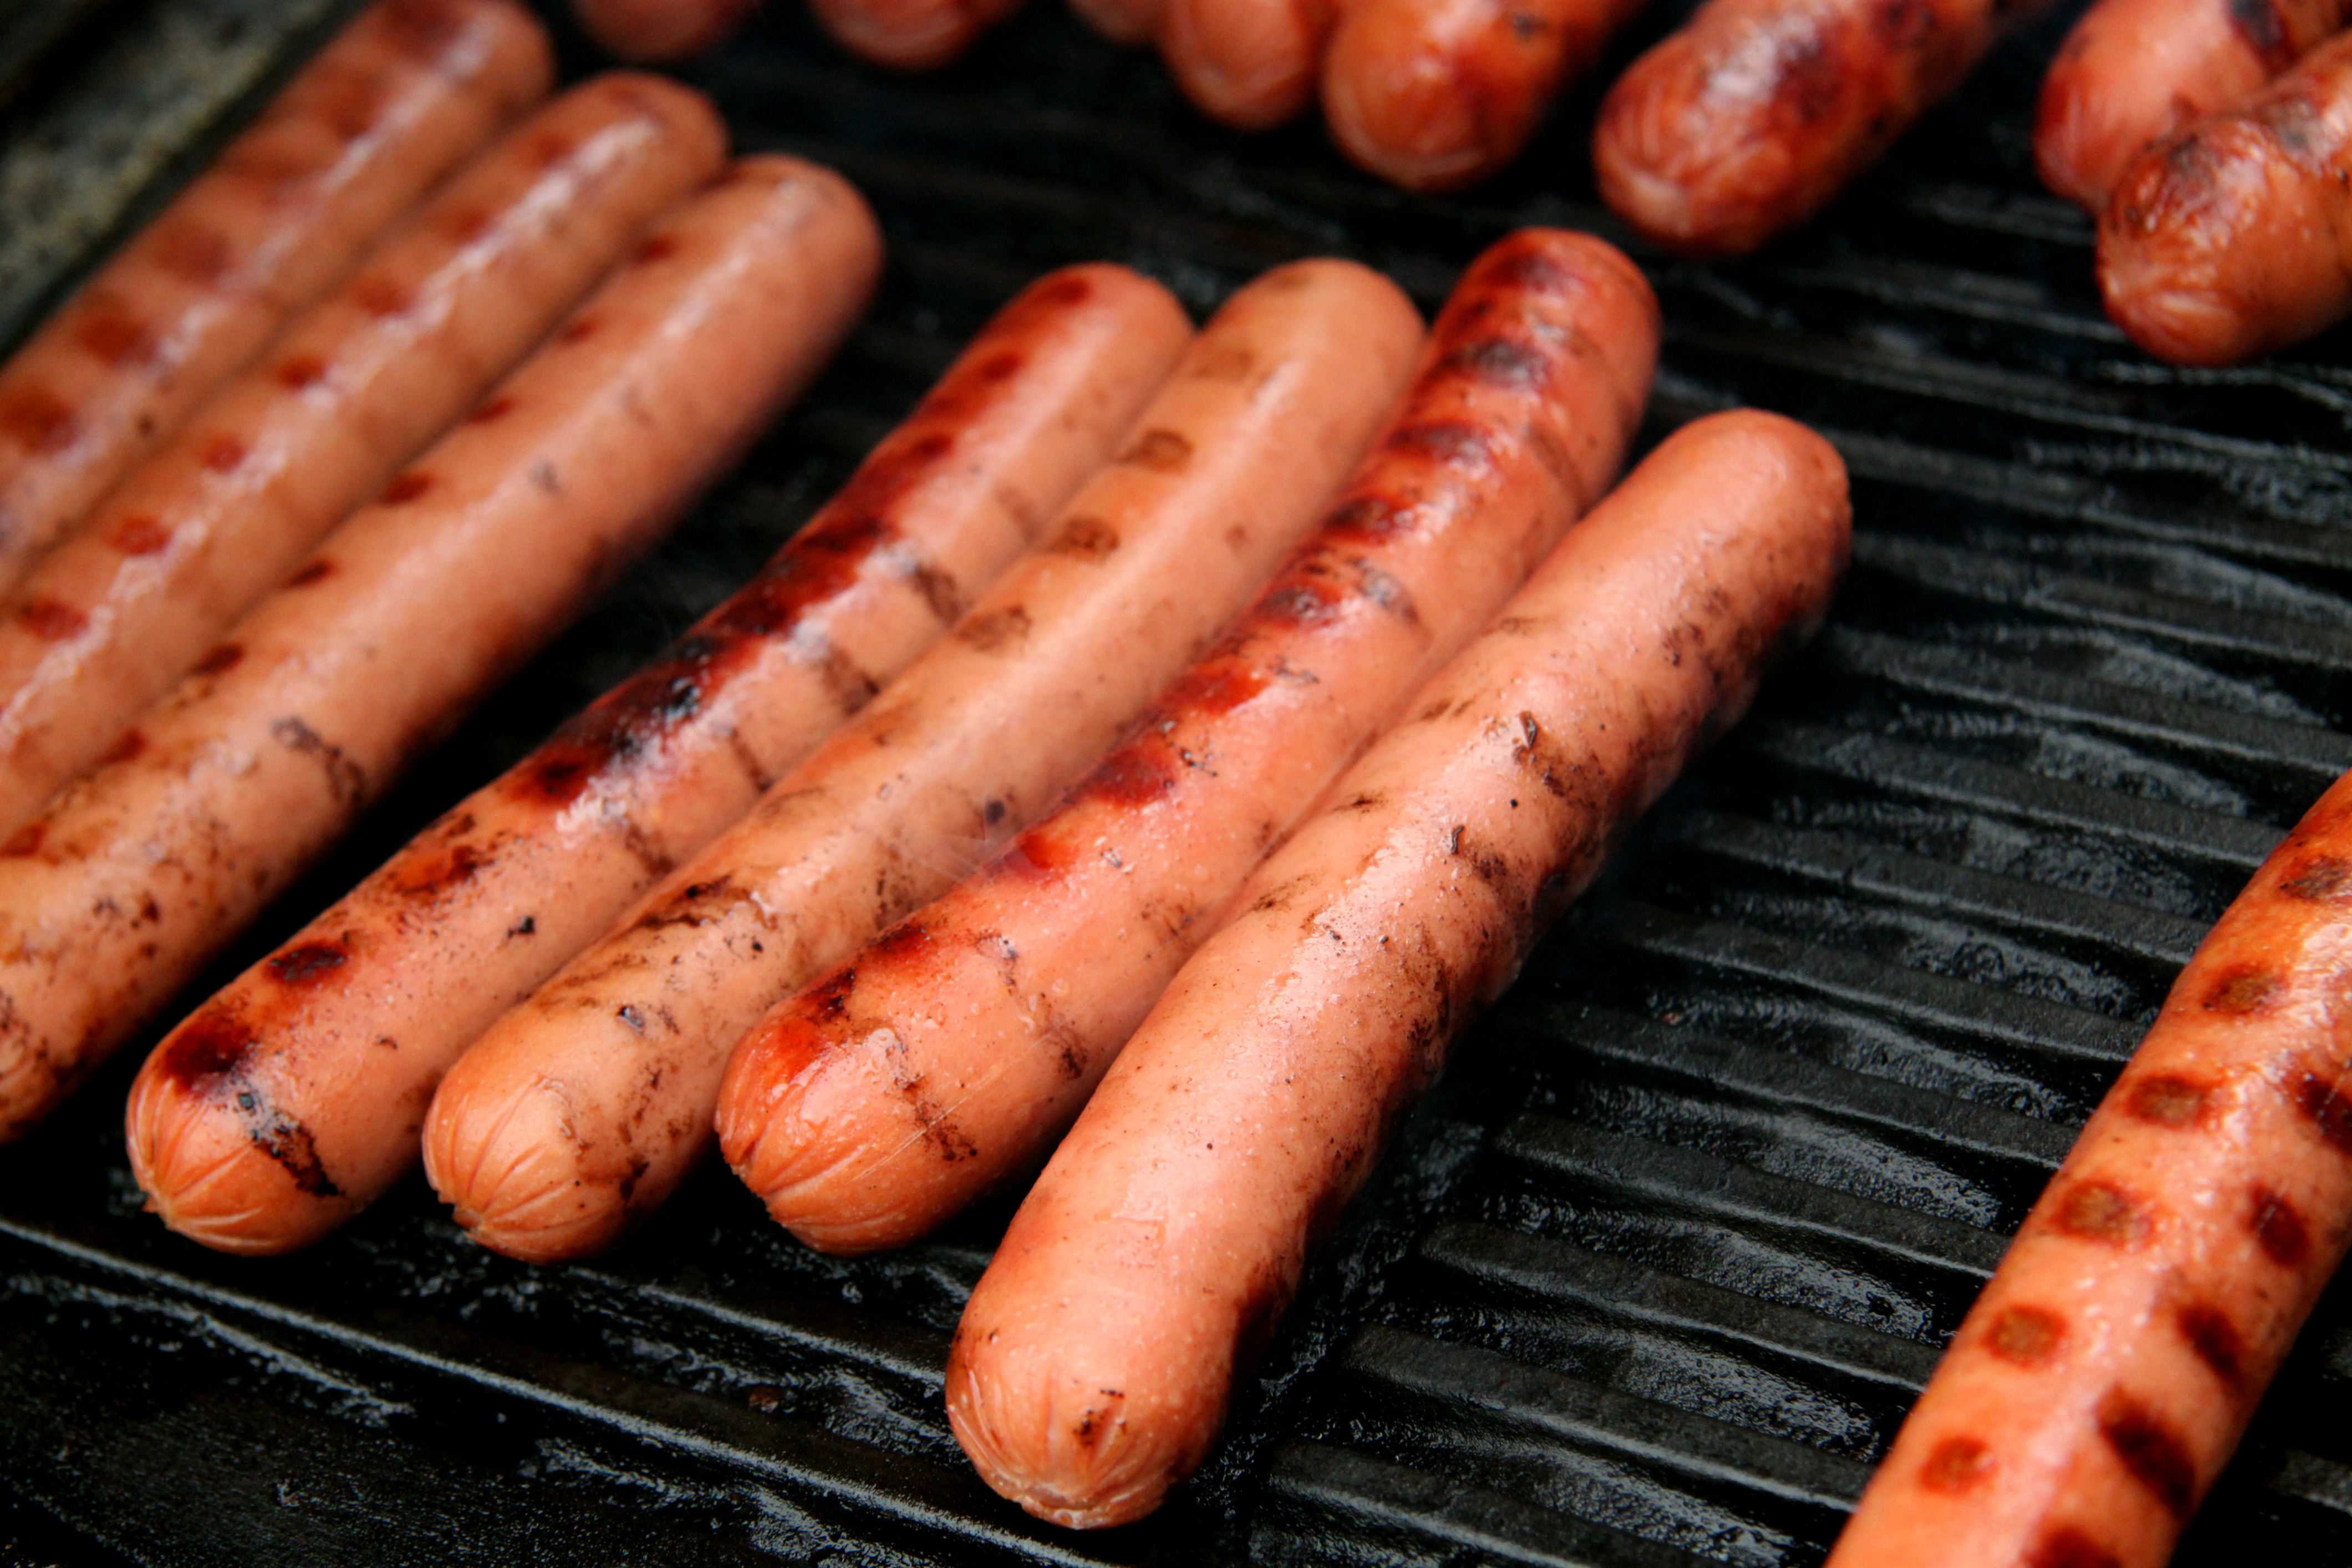 LISTEN: Ara and his wieners were the talk of the town haha!